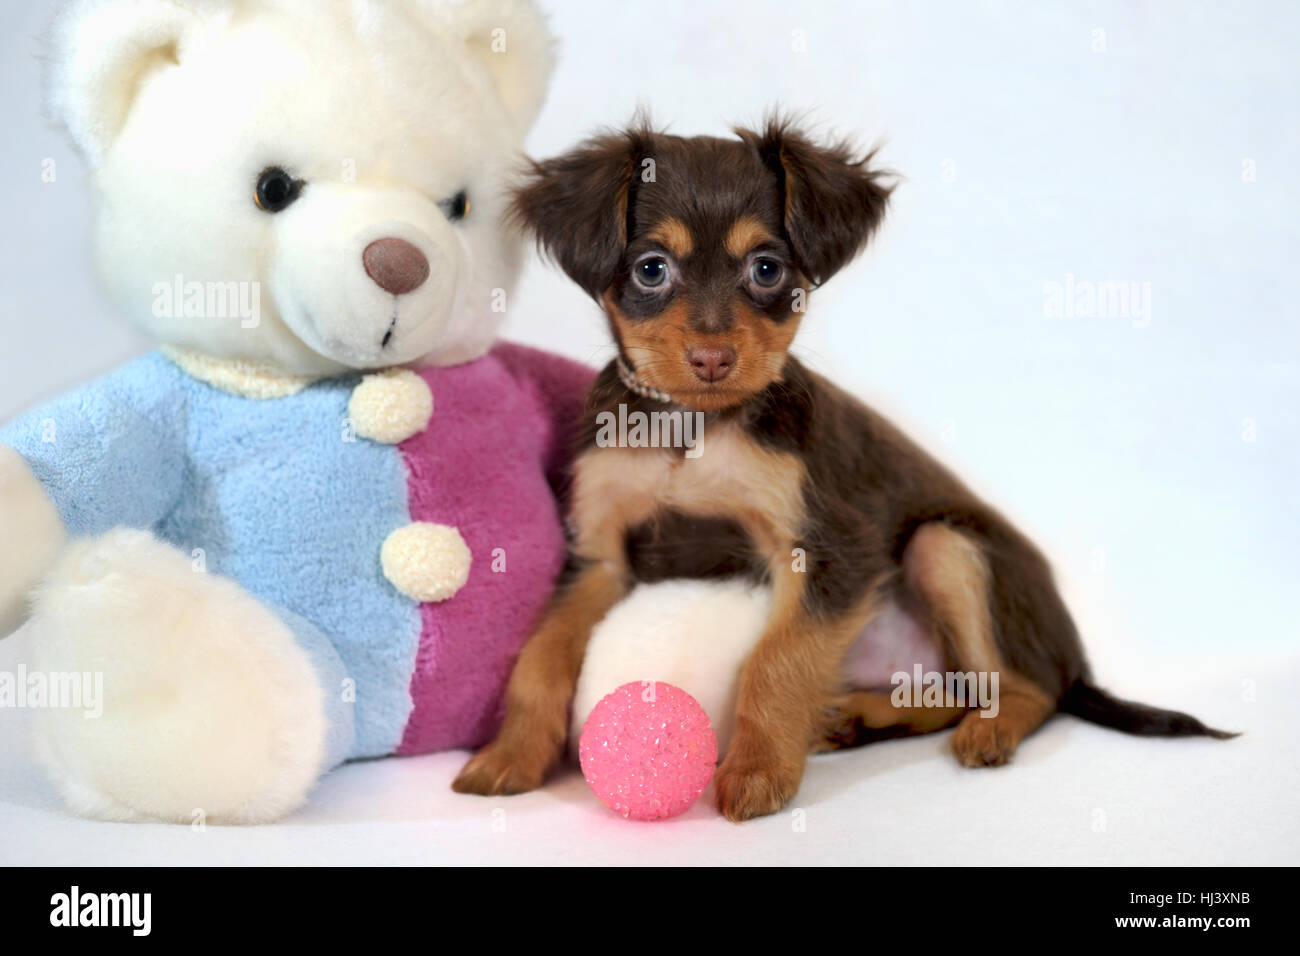 Chocolate with Vanilla. Brown and tan long-haired Russkiy toy dog puppy with bear toy. Stock Photo